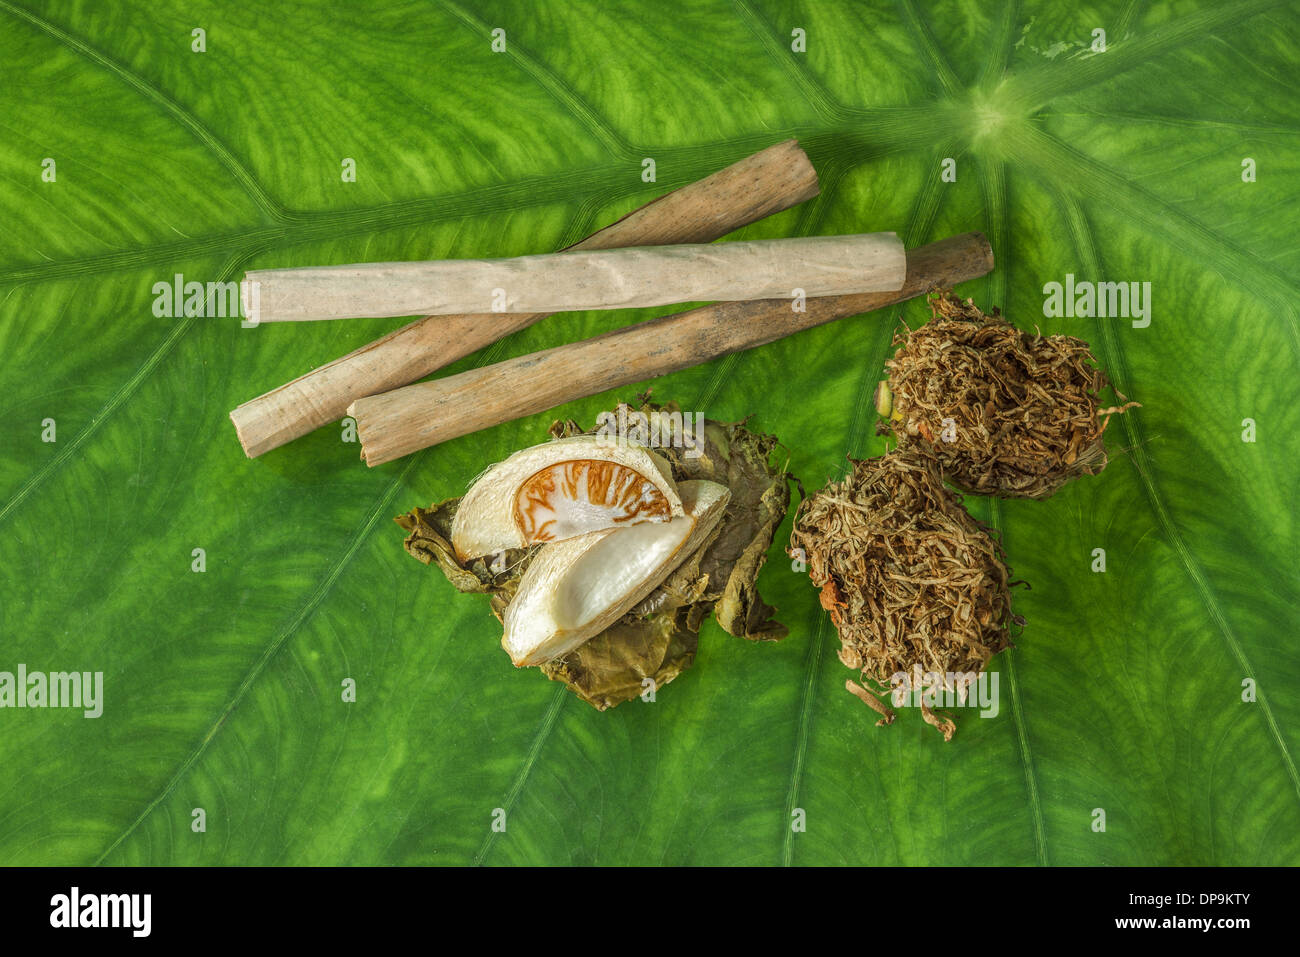 Tobacco leaves were dried, cut into small strips called line tobacco,with Betel palm fruit on green leaf. Stock Photo